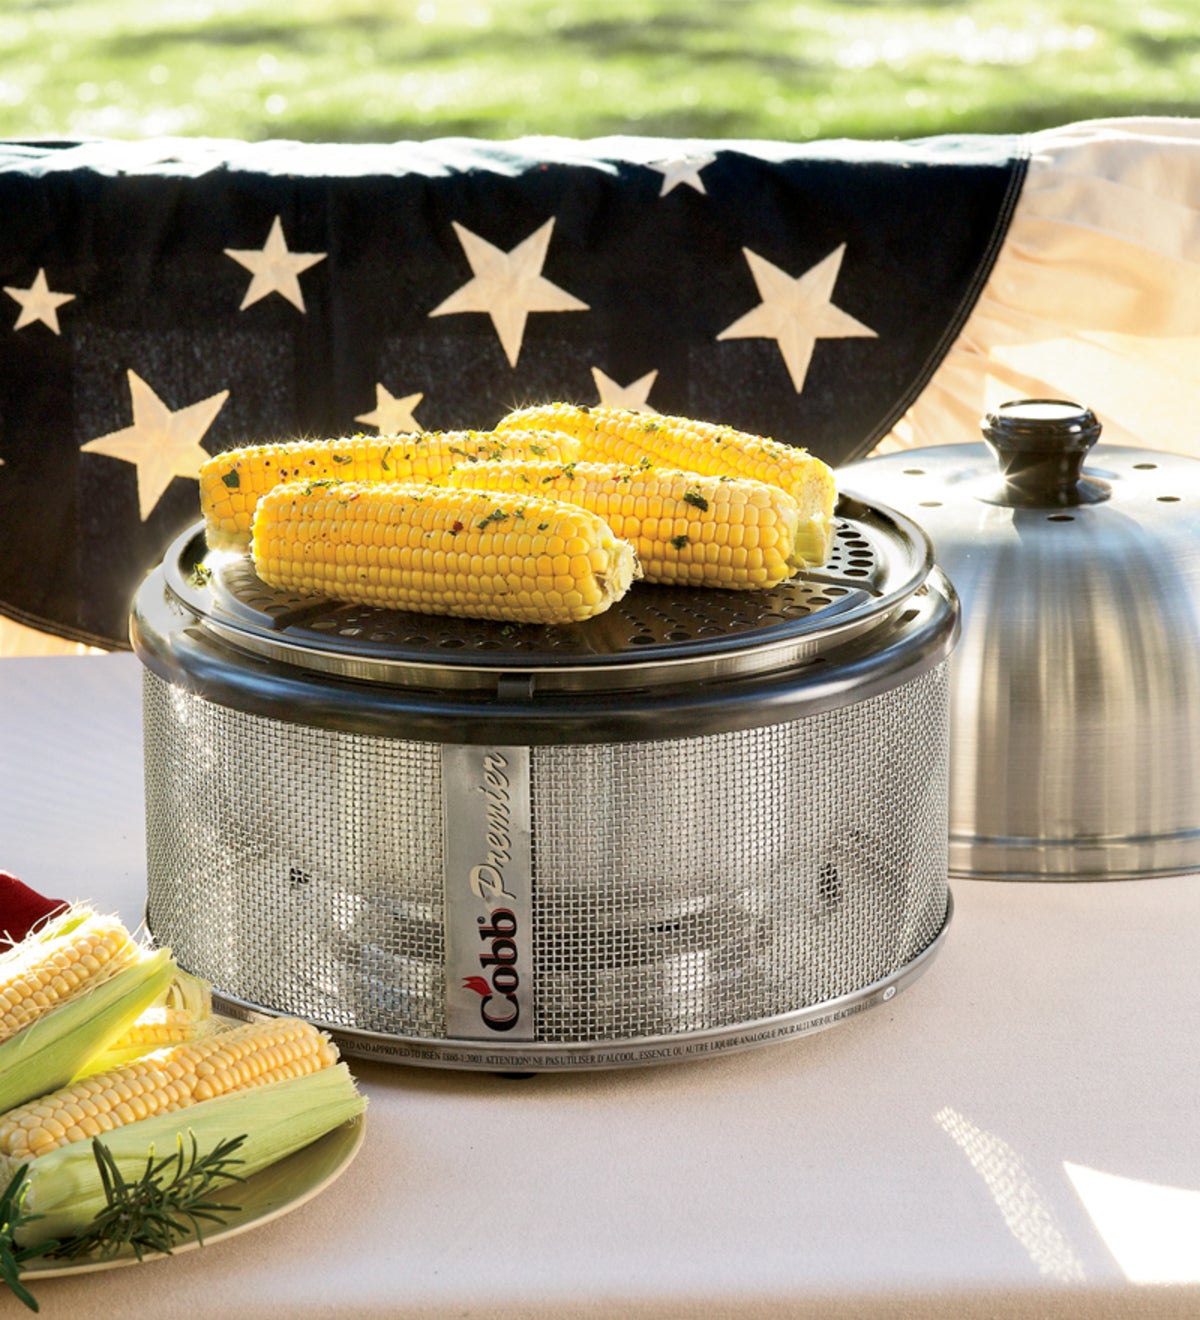 Portable Table-Top Stainless Steel Cobb Grill